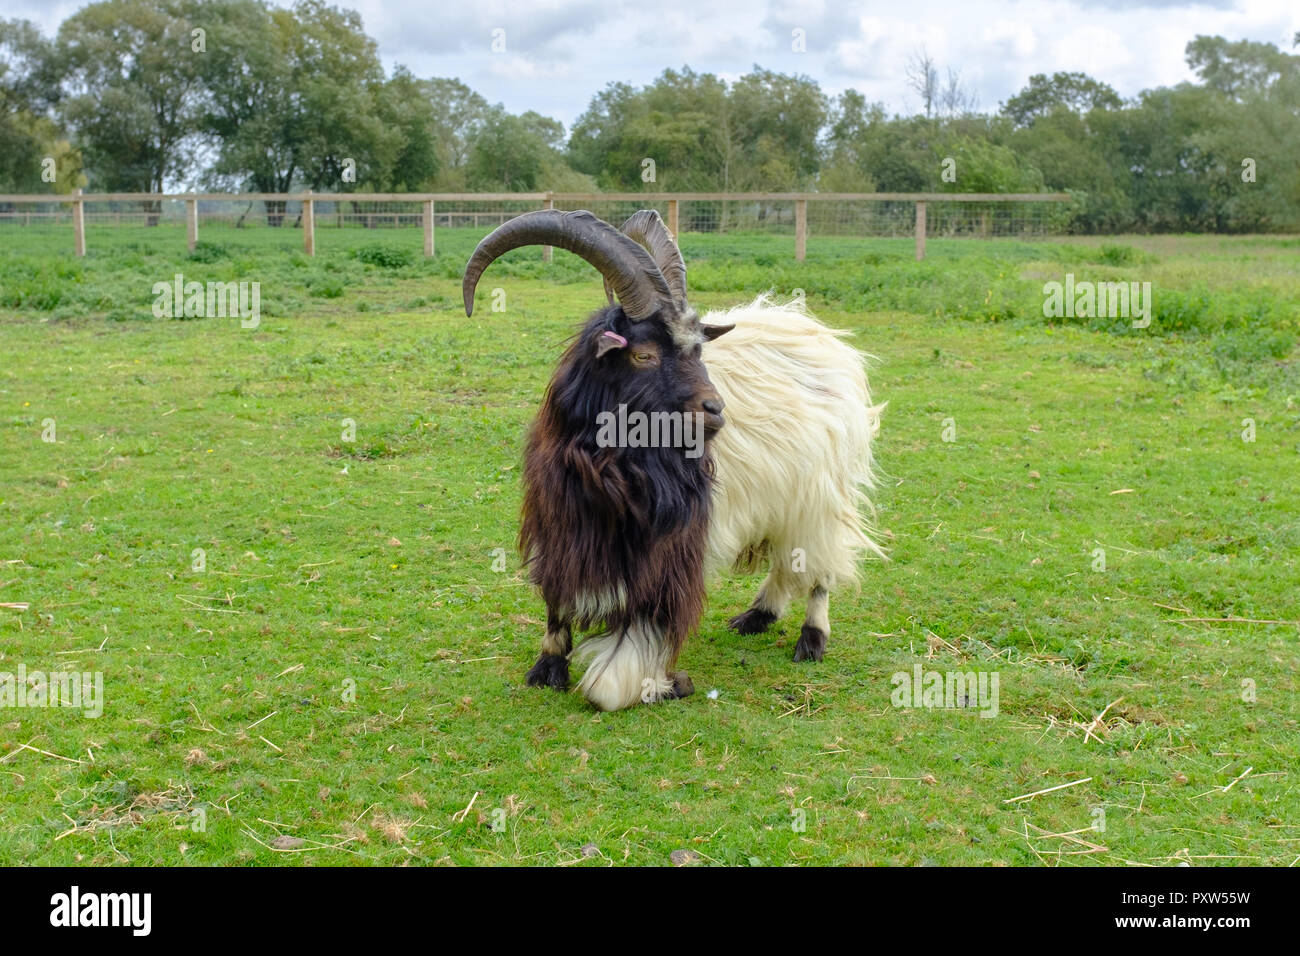 Bagot Goat, ancient breed recorded 1387 in England, used in conservation grazing on brambles and weeds. Stock Photo